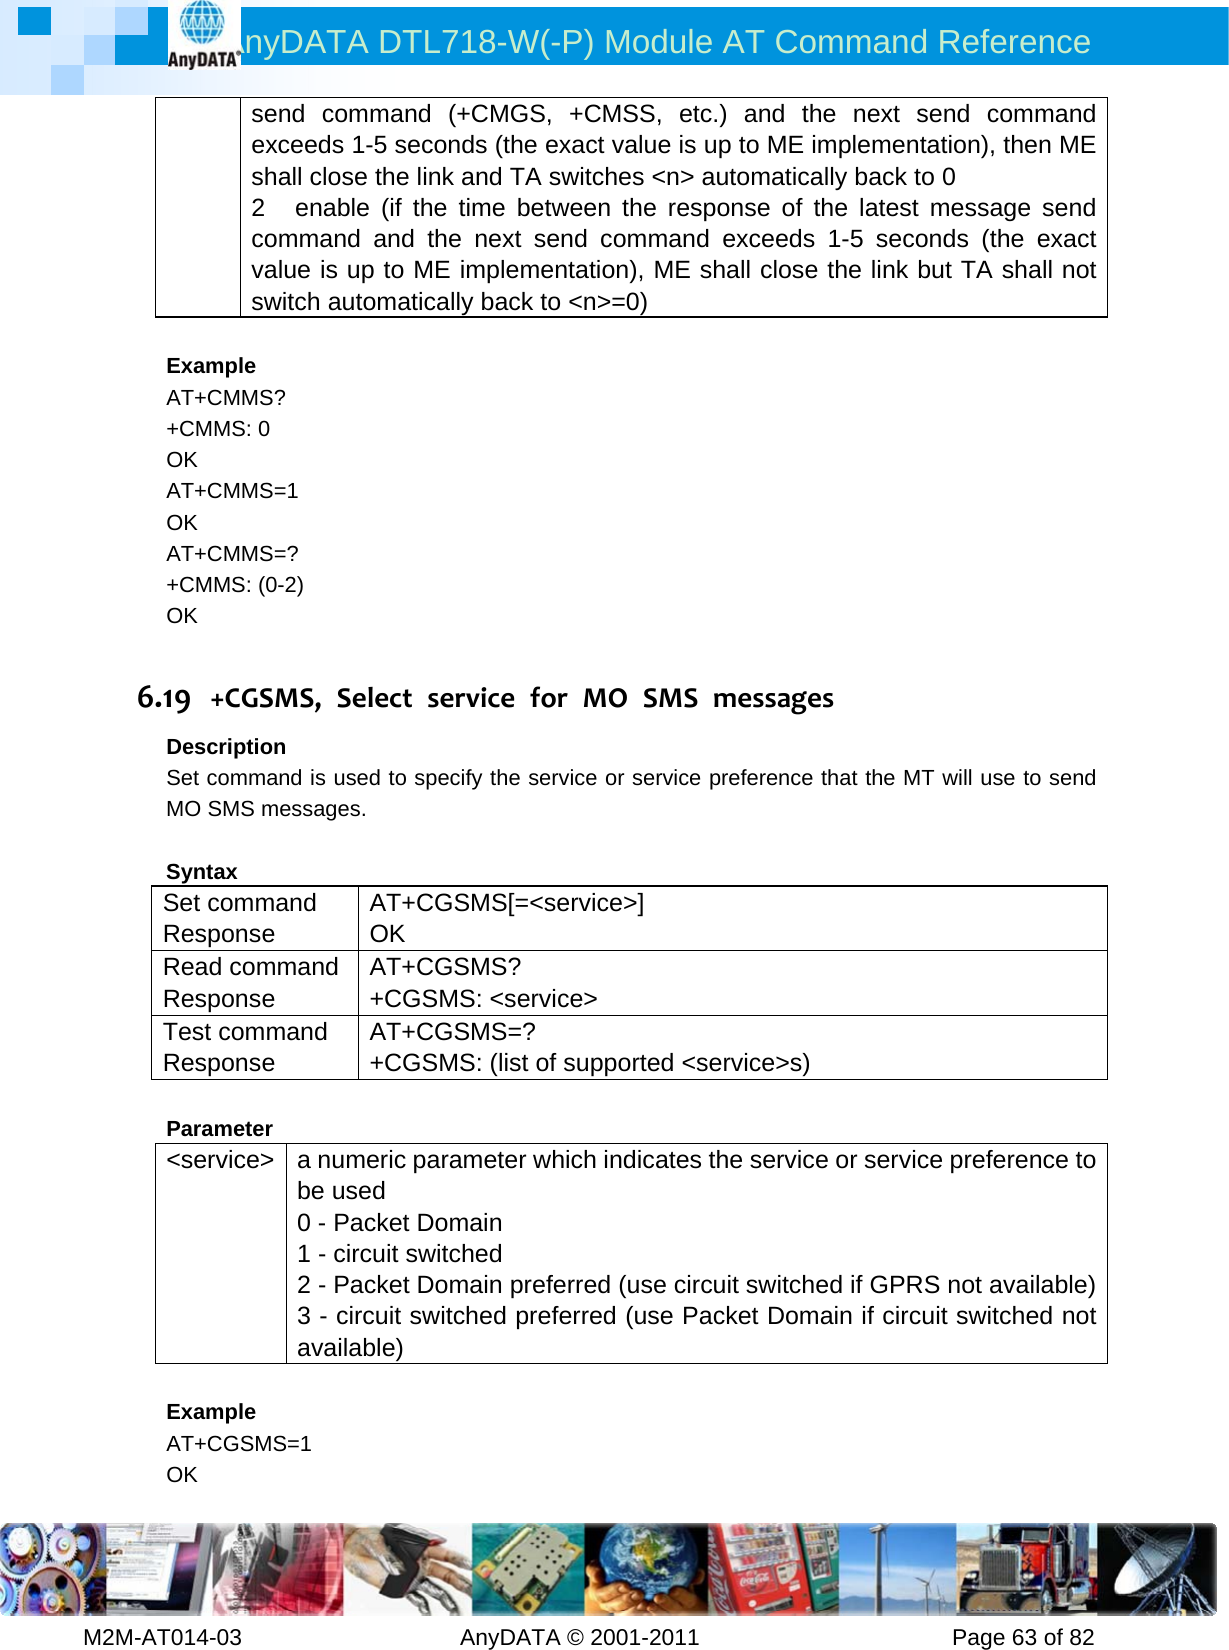 AnyDATA DTL718-W(-P) Module AT Command Reference         M2M-AT014-03                   AnyDATA © 2001-2011                      Page 63 of 82 send command (+CMGS, +CMSS, etc.) and the next send command exceeds 1-5 seconds (the exact value is up to ME implementation), then ME shall close the link and TA switches &lt;n&gt; automatically back to 0 2  enable (if the time between the response of the latest message send command and the next send command exceeds 1-5 seconds (the exact value is up to ME implementation), ME shall close the link but TA shall not switch automatically back to &lt;n&gt;=0)  Example AT+CMMS? +CMMS: 0 OK AT+CMMS=1 OK AT+CMMS=? +CMMS: (0-2) OK  6.19 +CGSMS,SelectserviceforMOSMSmessagesDescription Set command is used to specify the service or service preference that the MT will use to send MO SMS messages.  Syntax Set command Response AT+CGSMS[=&lt;service&gt;] OK Read command Response AT+CGSMS? +CGSMS: &lt;service&gt; Test command Response AT+CGSMS=? +CGSMS: (list of supported &lt;service&gt;s)  Parameter &lt;service&gt; a numeric parameter which indicates the service or service preference to be used 0 - Packet Domain 1 - circuit switched 2 - Packet Domain preferred (use circuit switched if GPRS not available)3 - circuit switched preferred (use Packet Domain if circuit switched not available)  Example AT+CGSMS=1 OK 